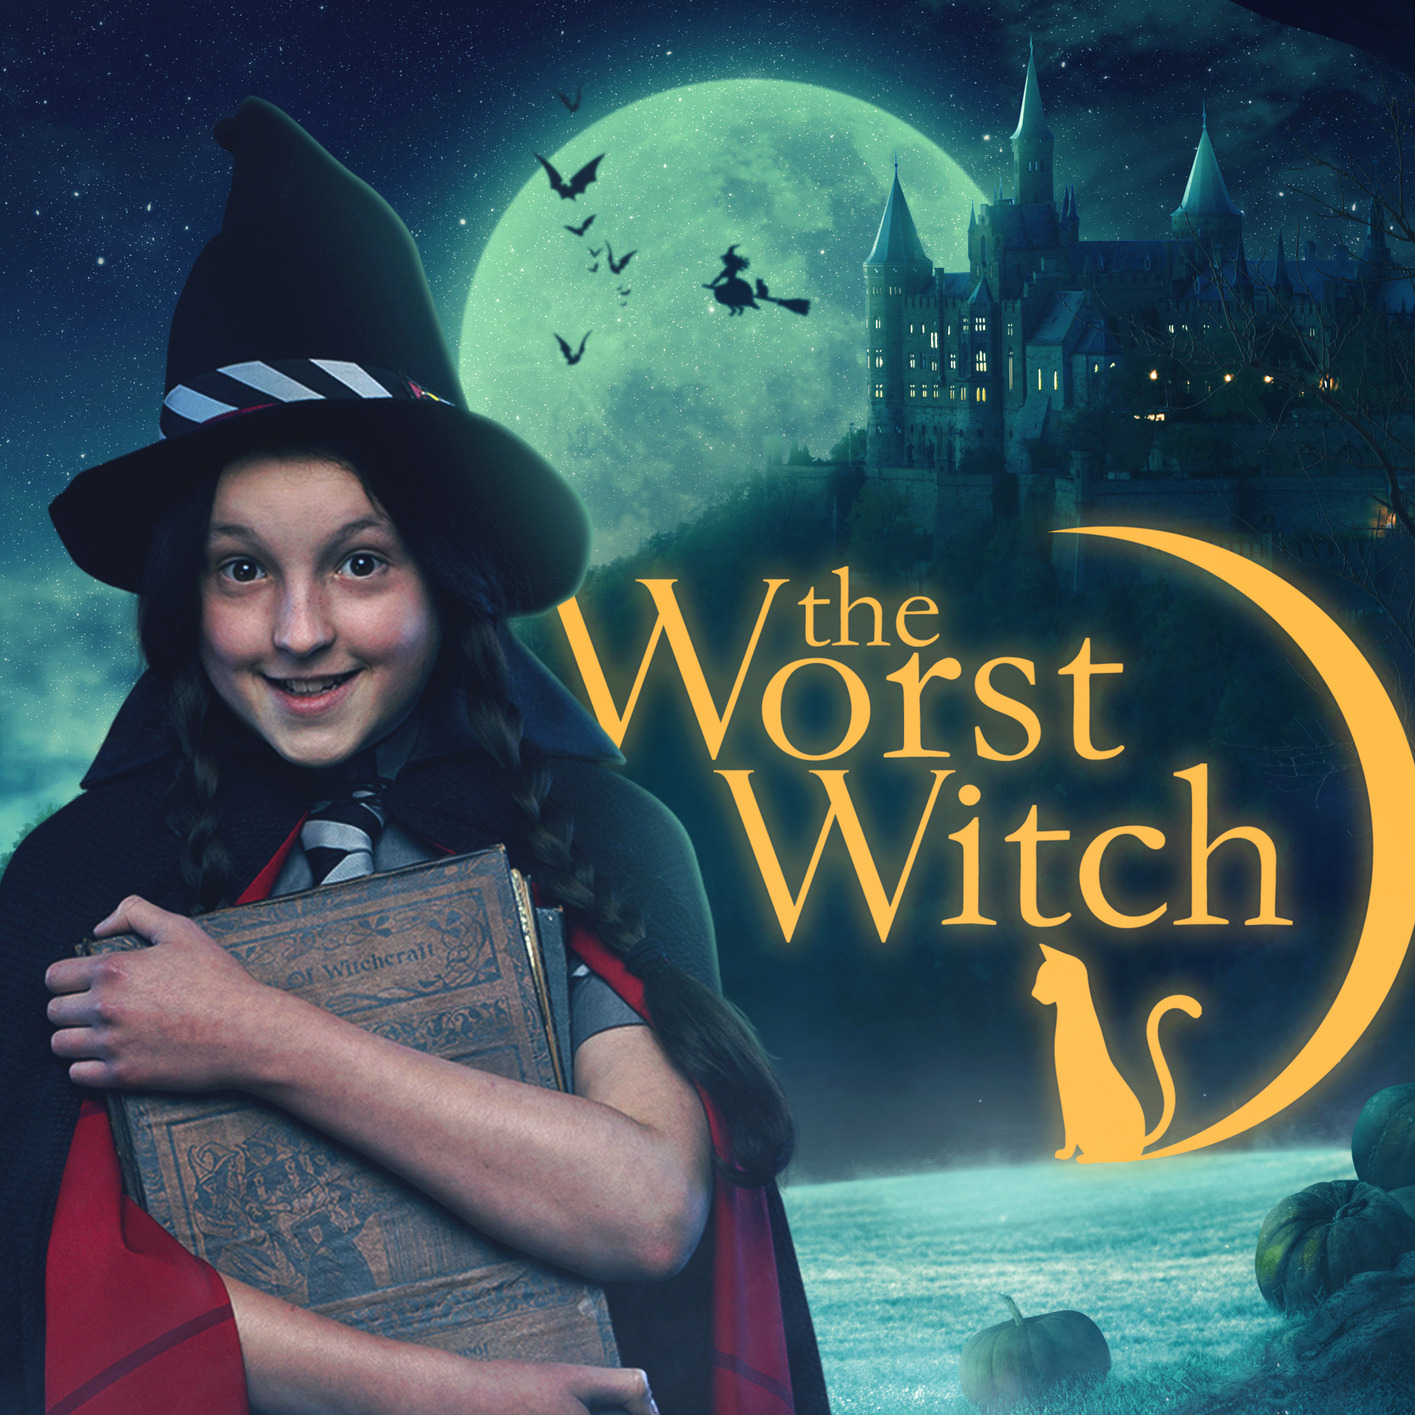 S01E09: The First Witch